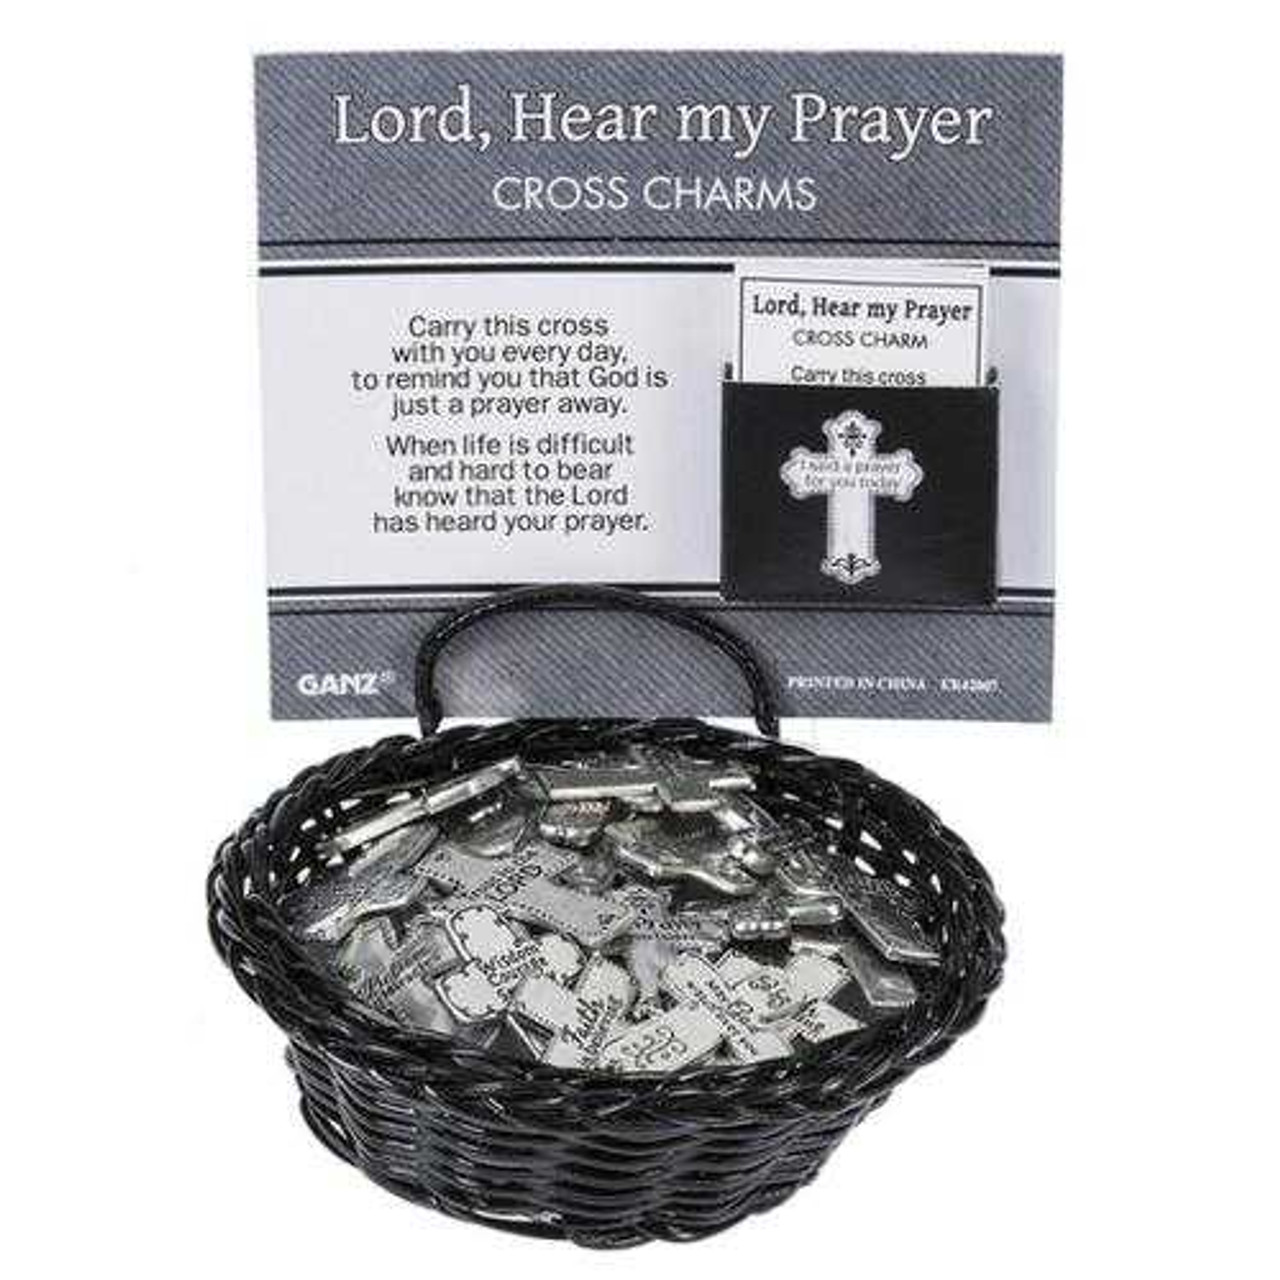 Wholesale Blessings Pocket Crosses Charms in a Basket (48 pc. ppk